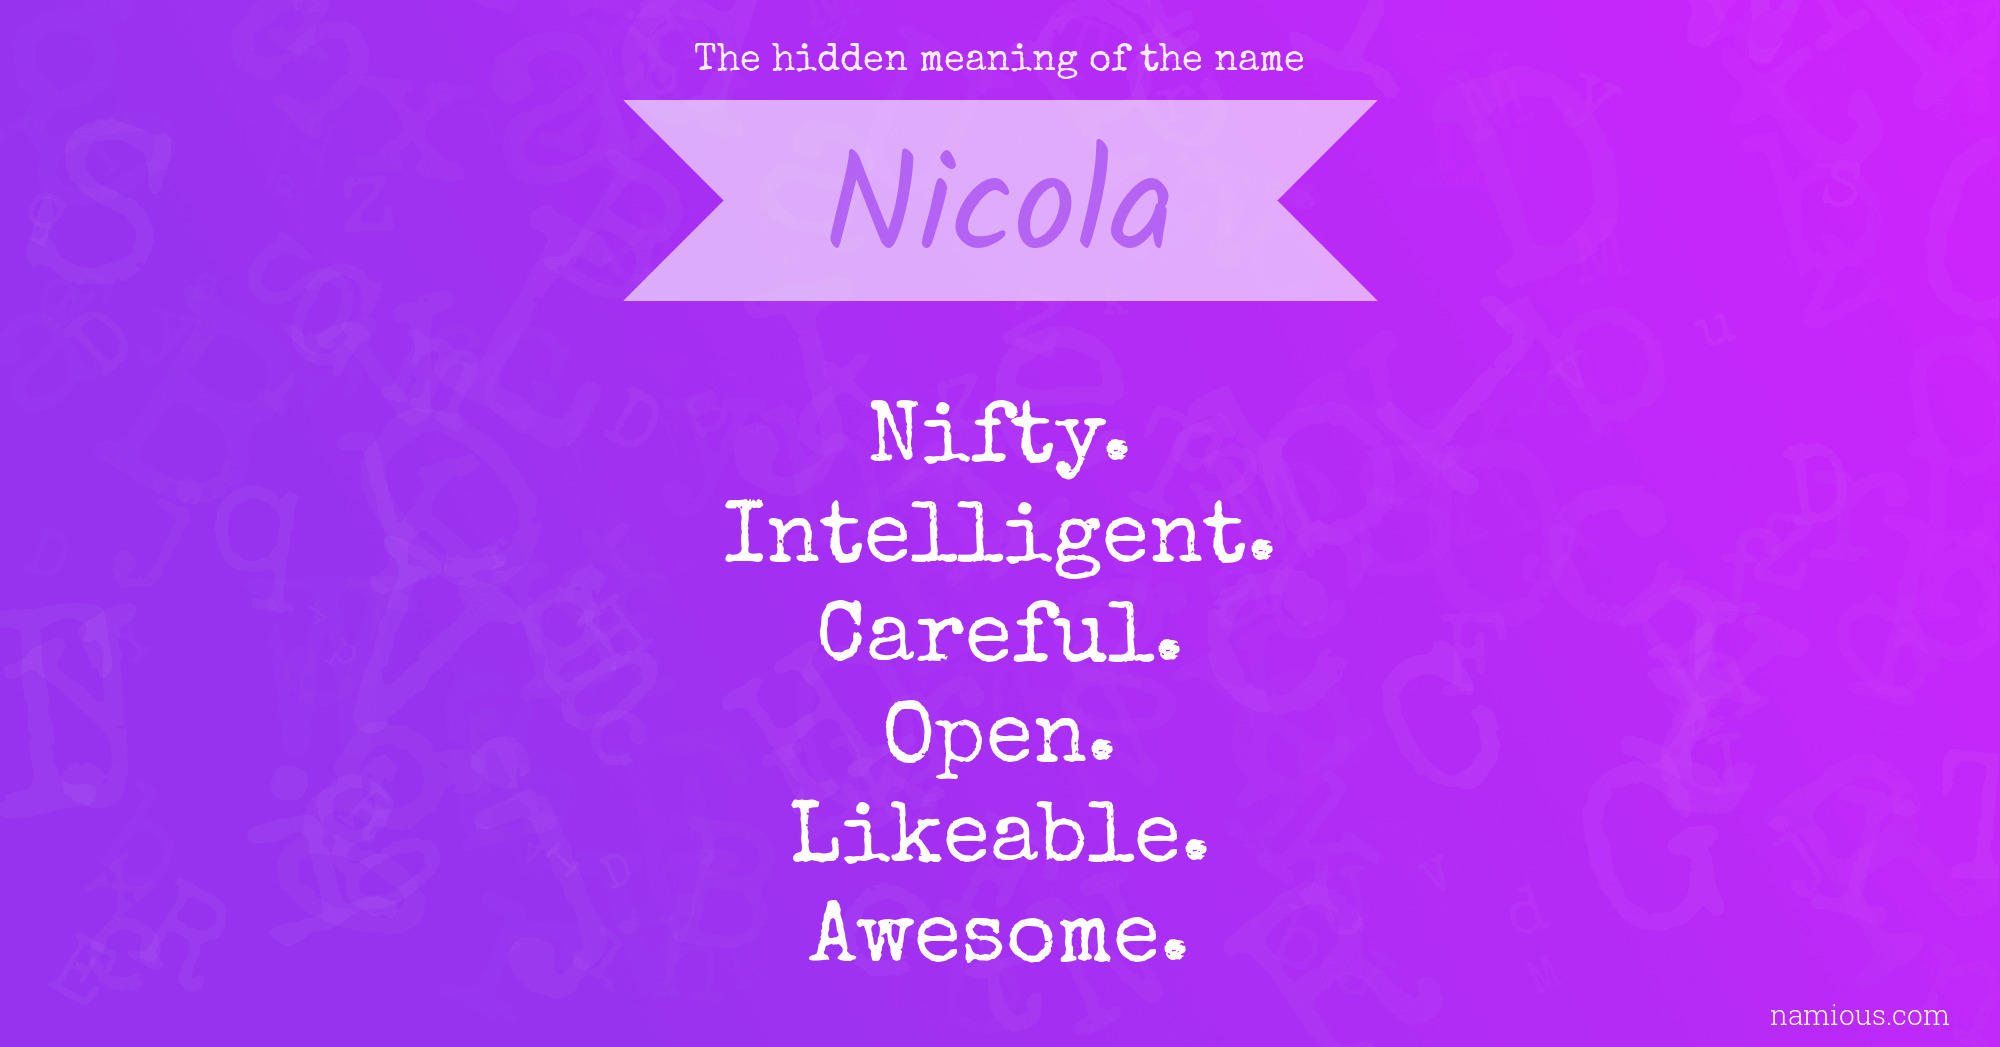 The hidden meaning of the name Nicola